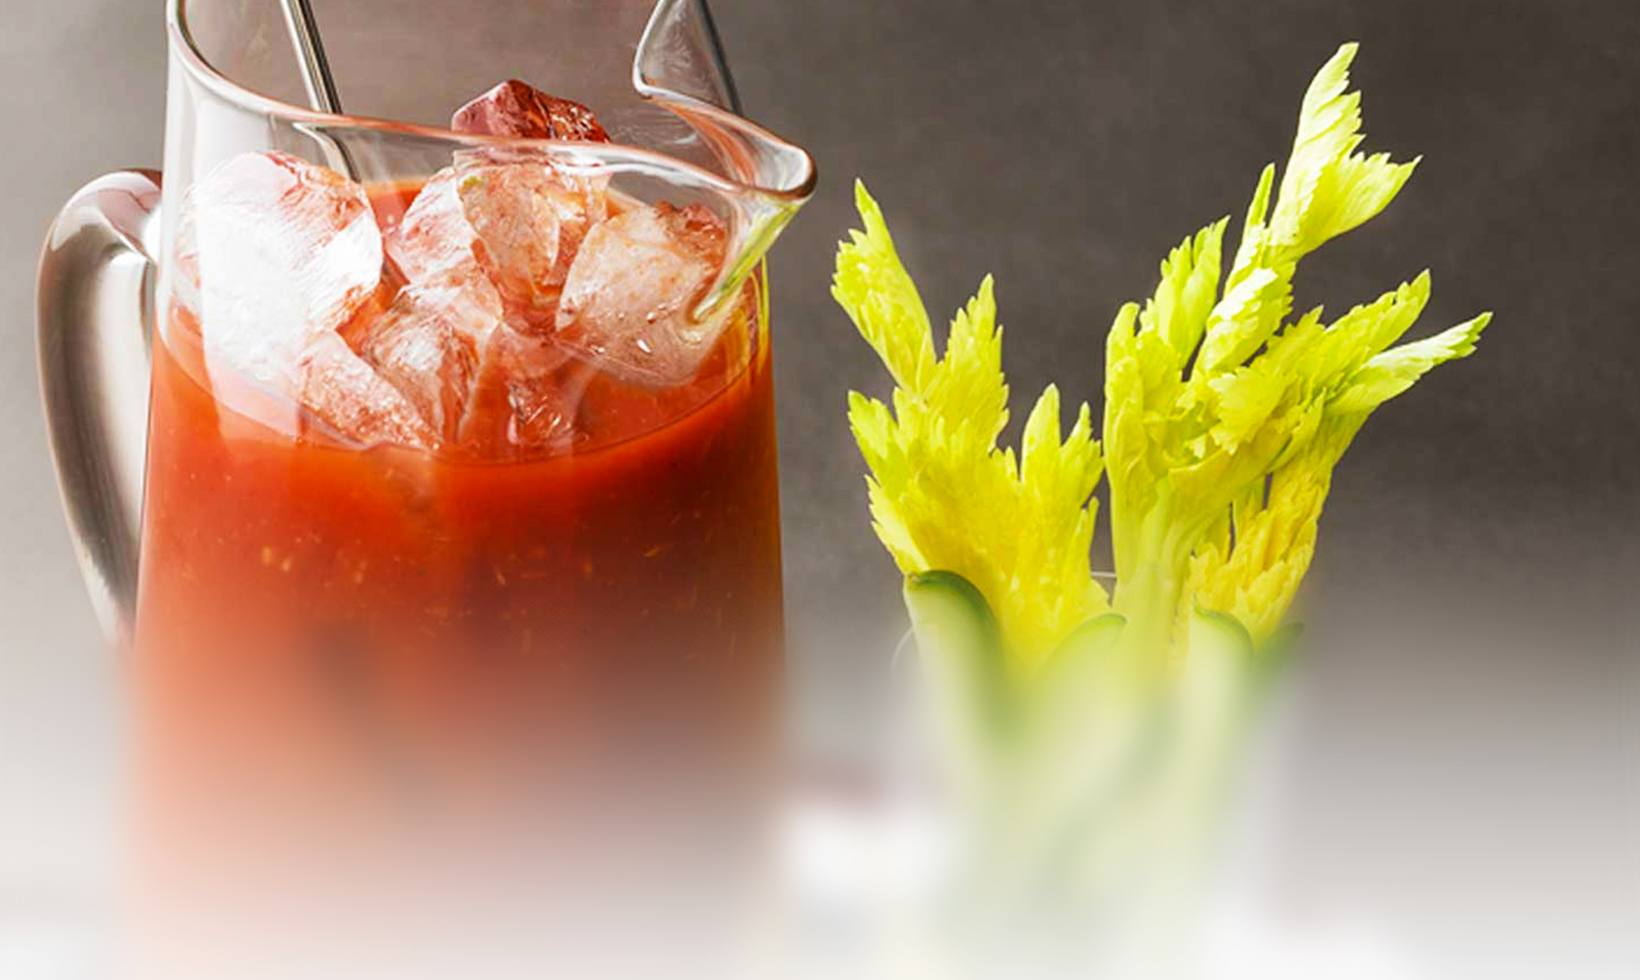 Bloody Mary Jug Cocktail Recipe